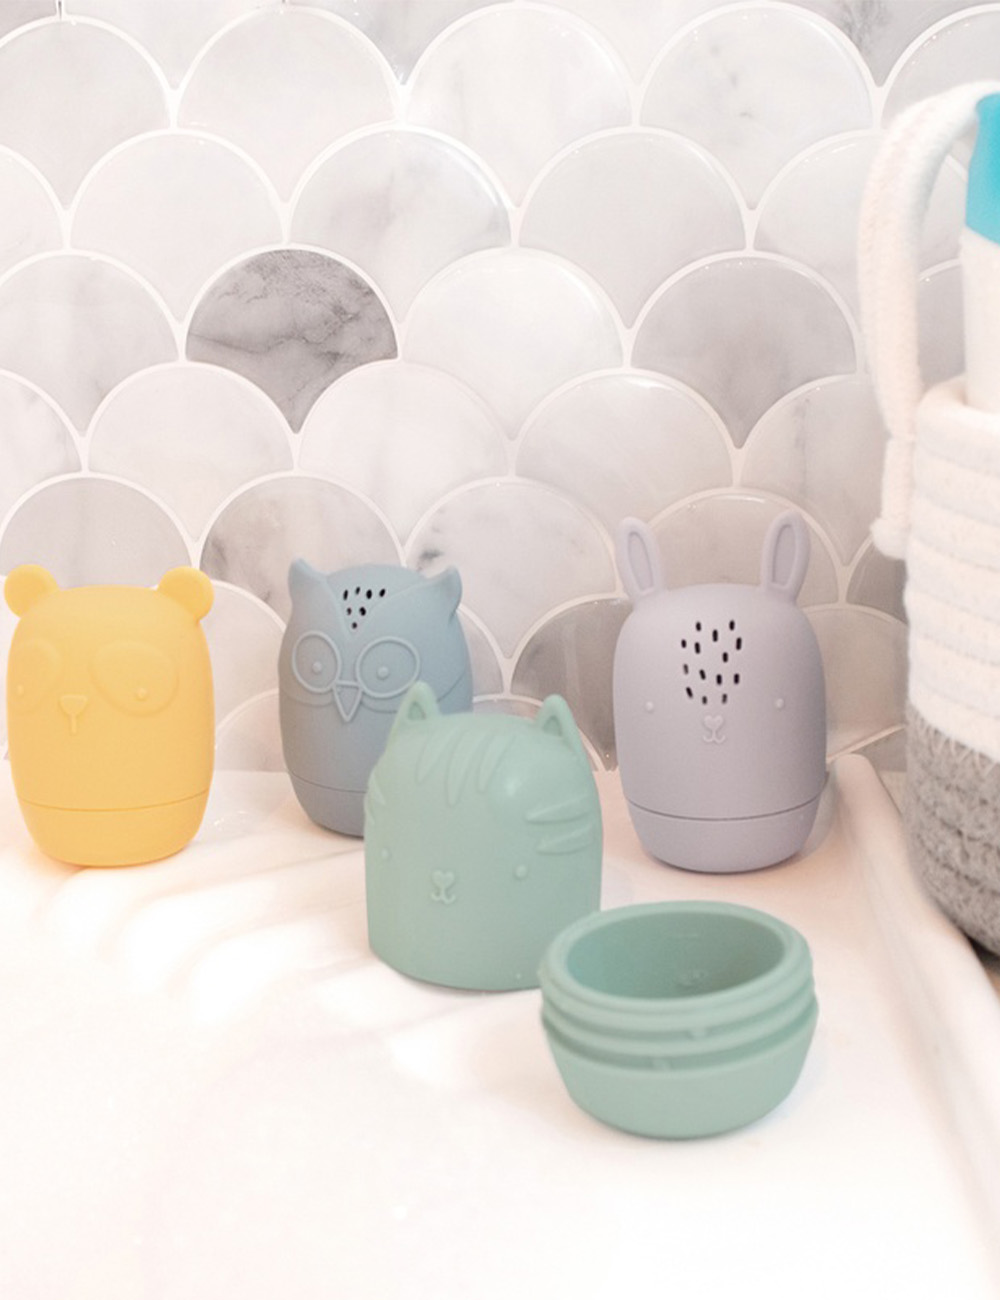 baby shower gift idea: squeeze bath toys in animal shapes